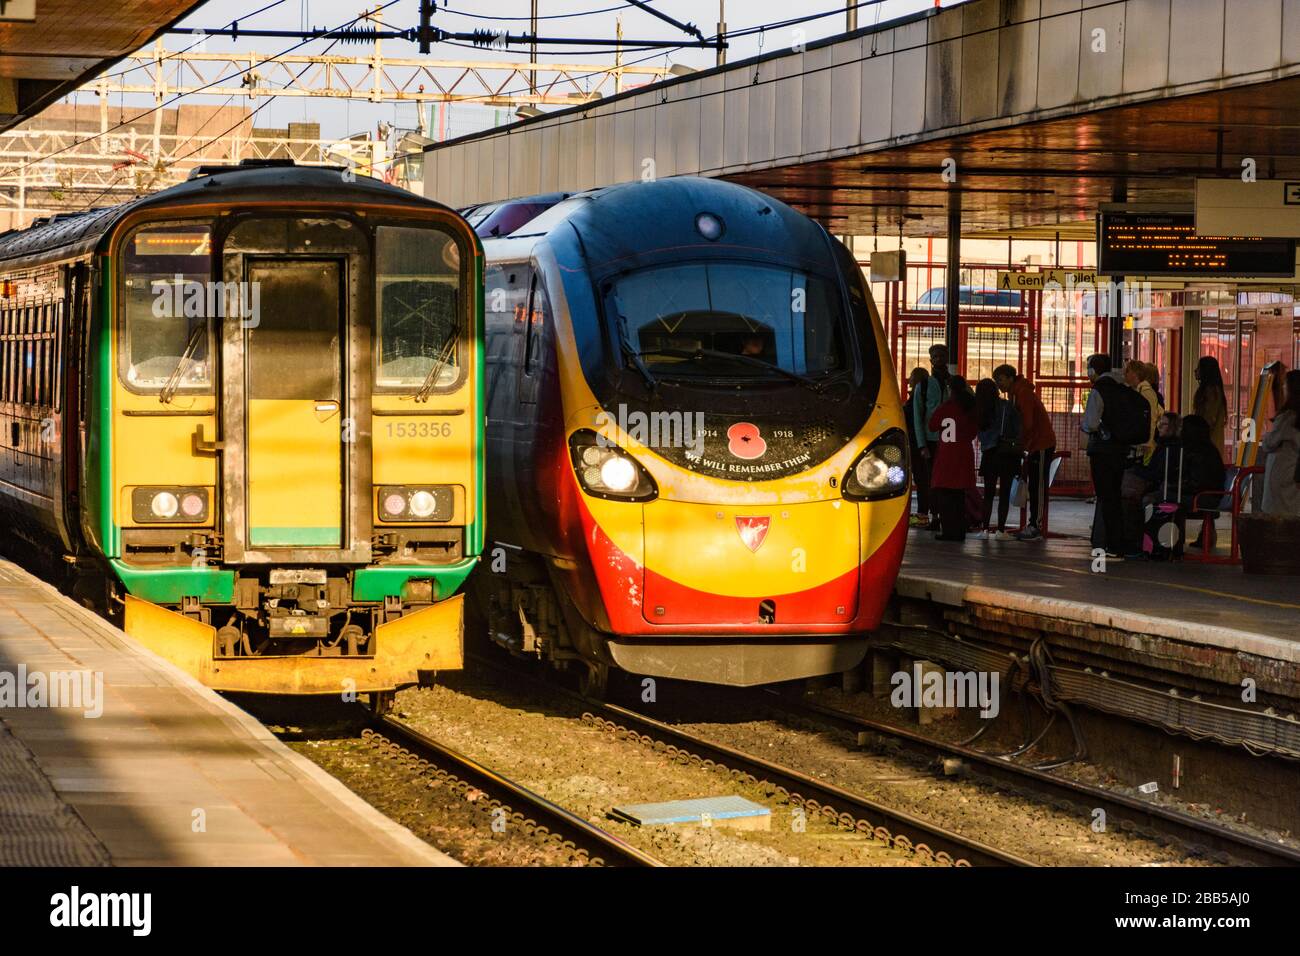 Virgin Trains Pendolino arrives at Coventry railway station next to a London Midlands Class 153 local service. Stock Photo